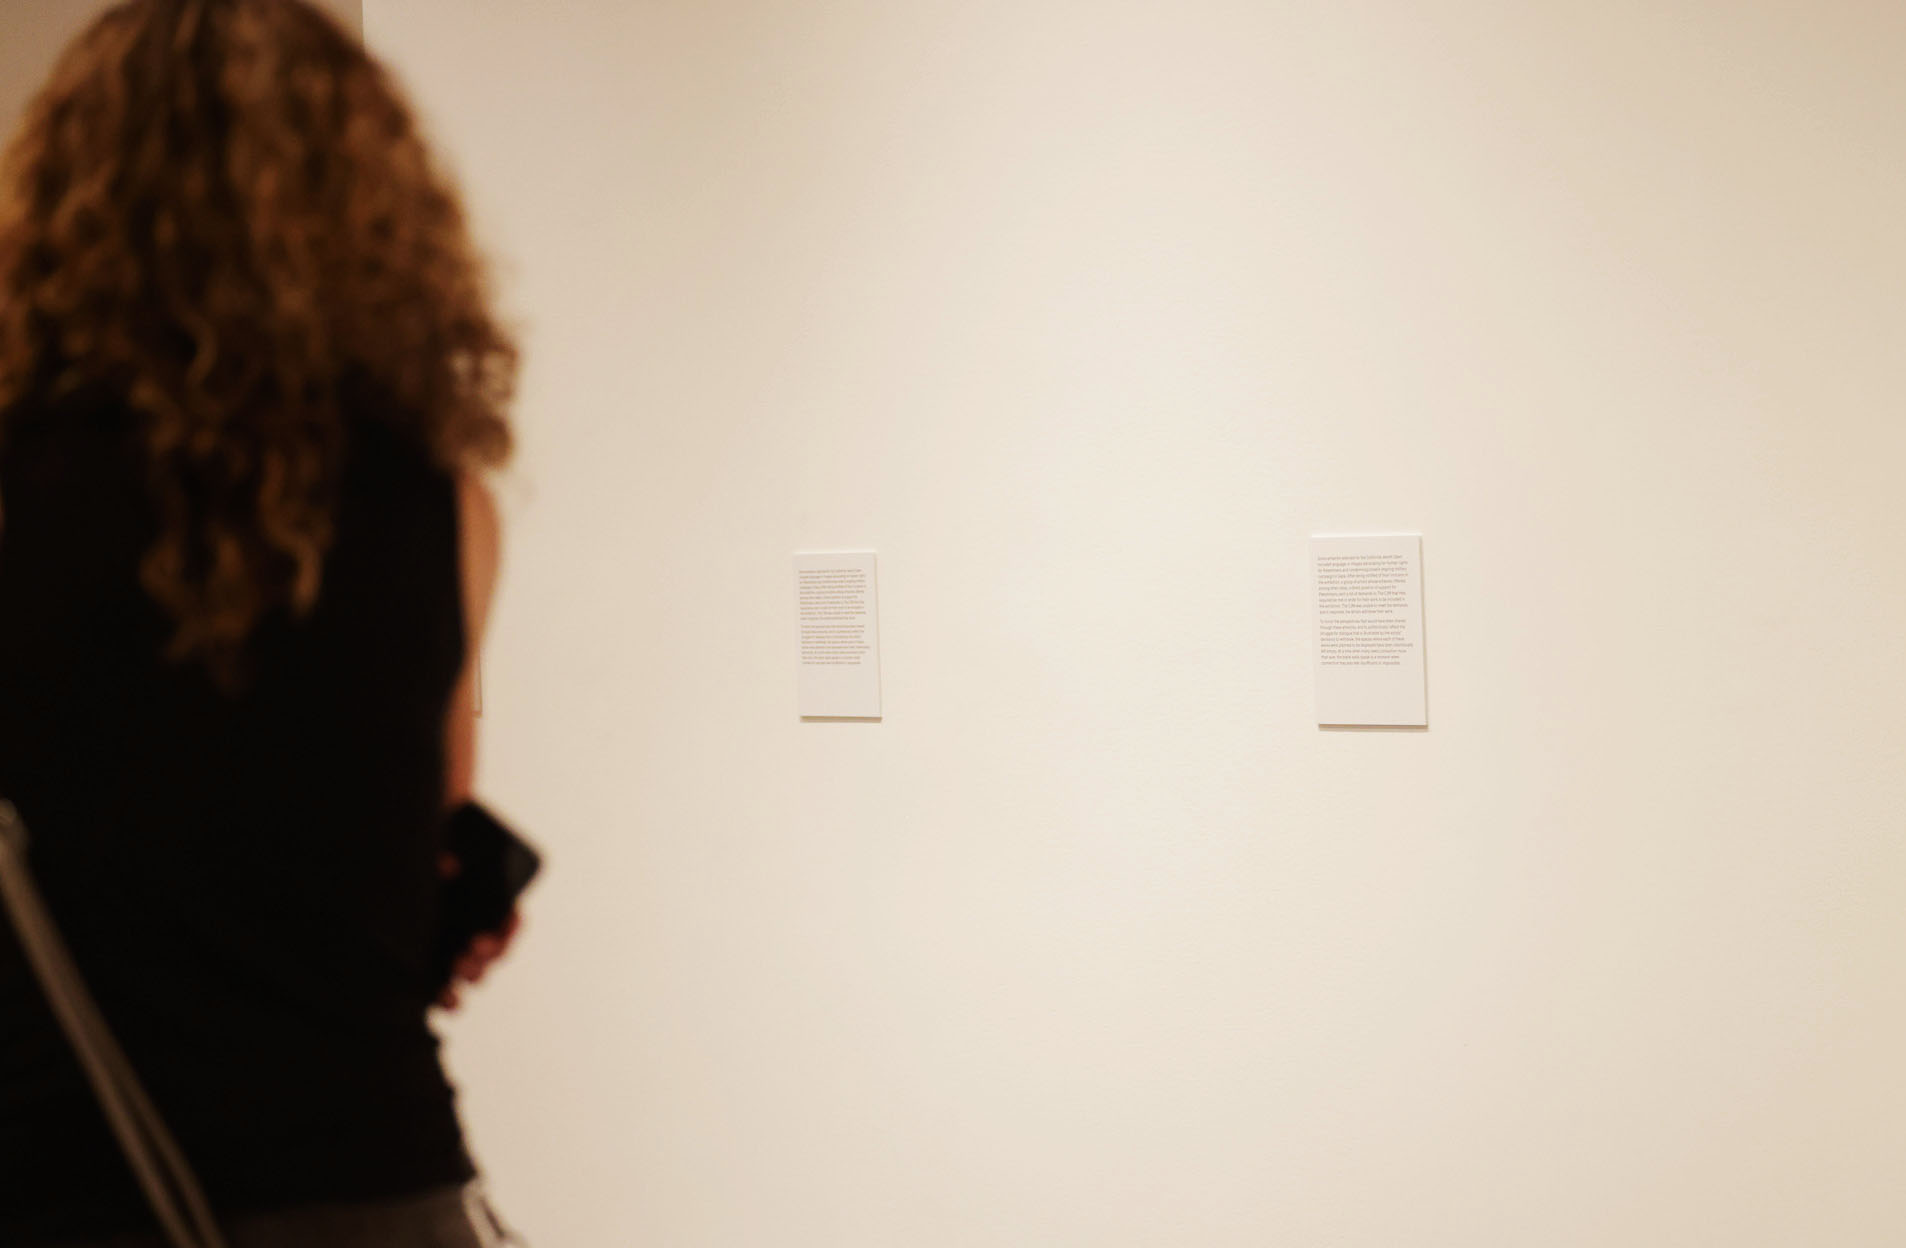 A person with curly hair, dressed in a sleeveless top, stands in front of a beige wall reading two small text panels.